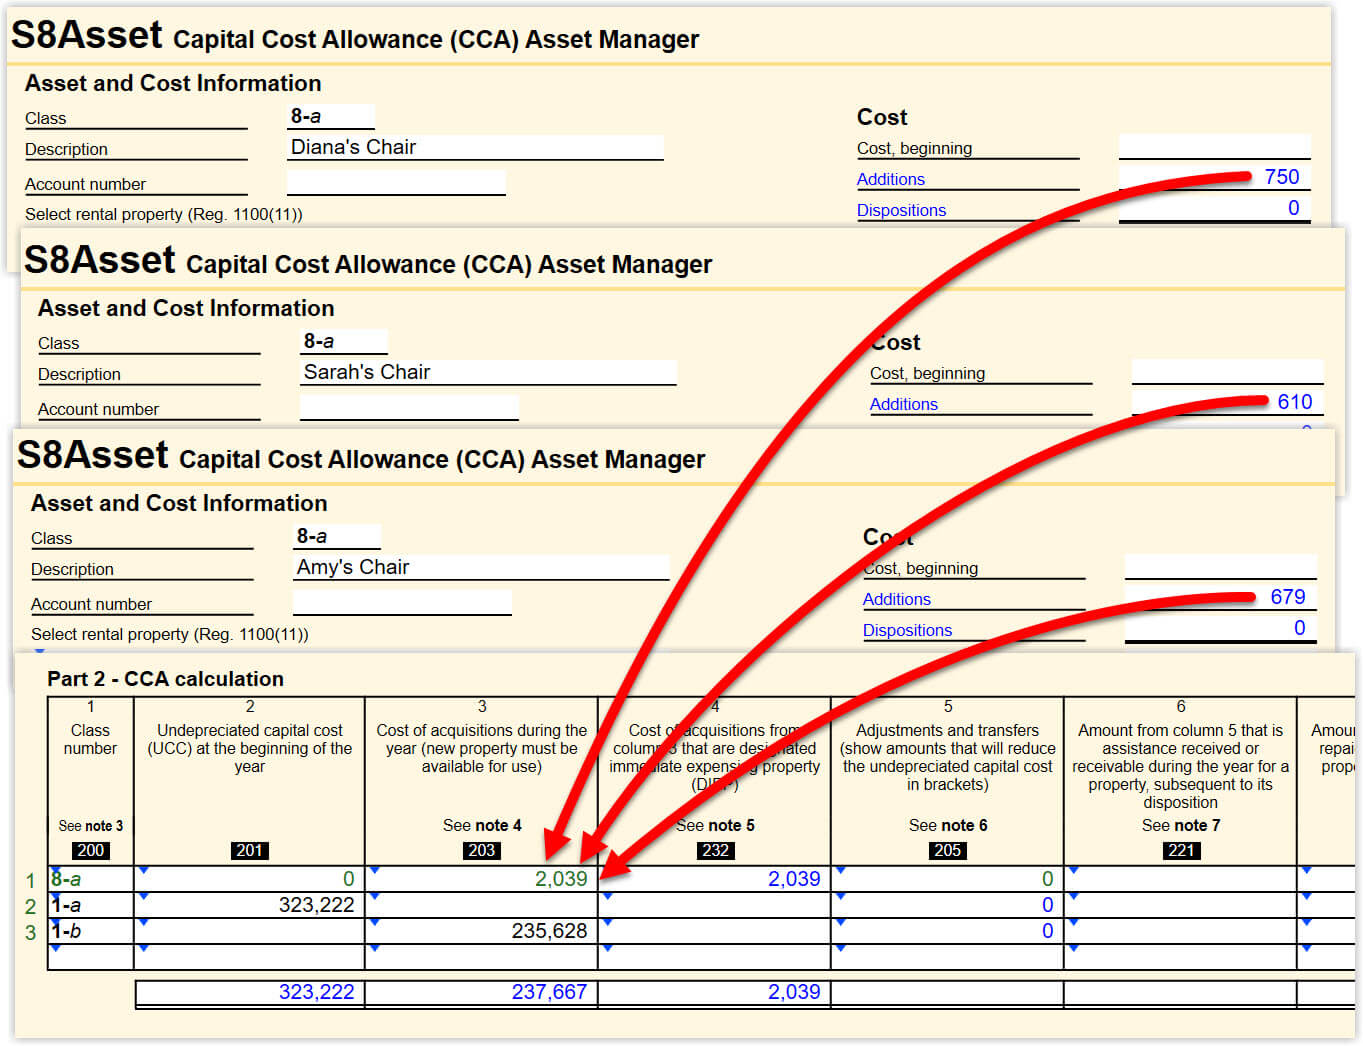 Screen Capture: Pooling of Assets